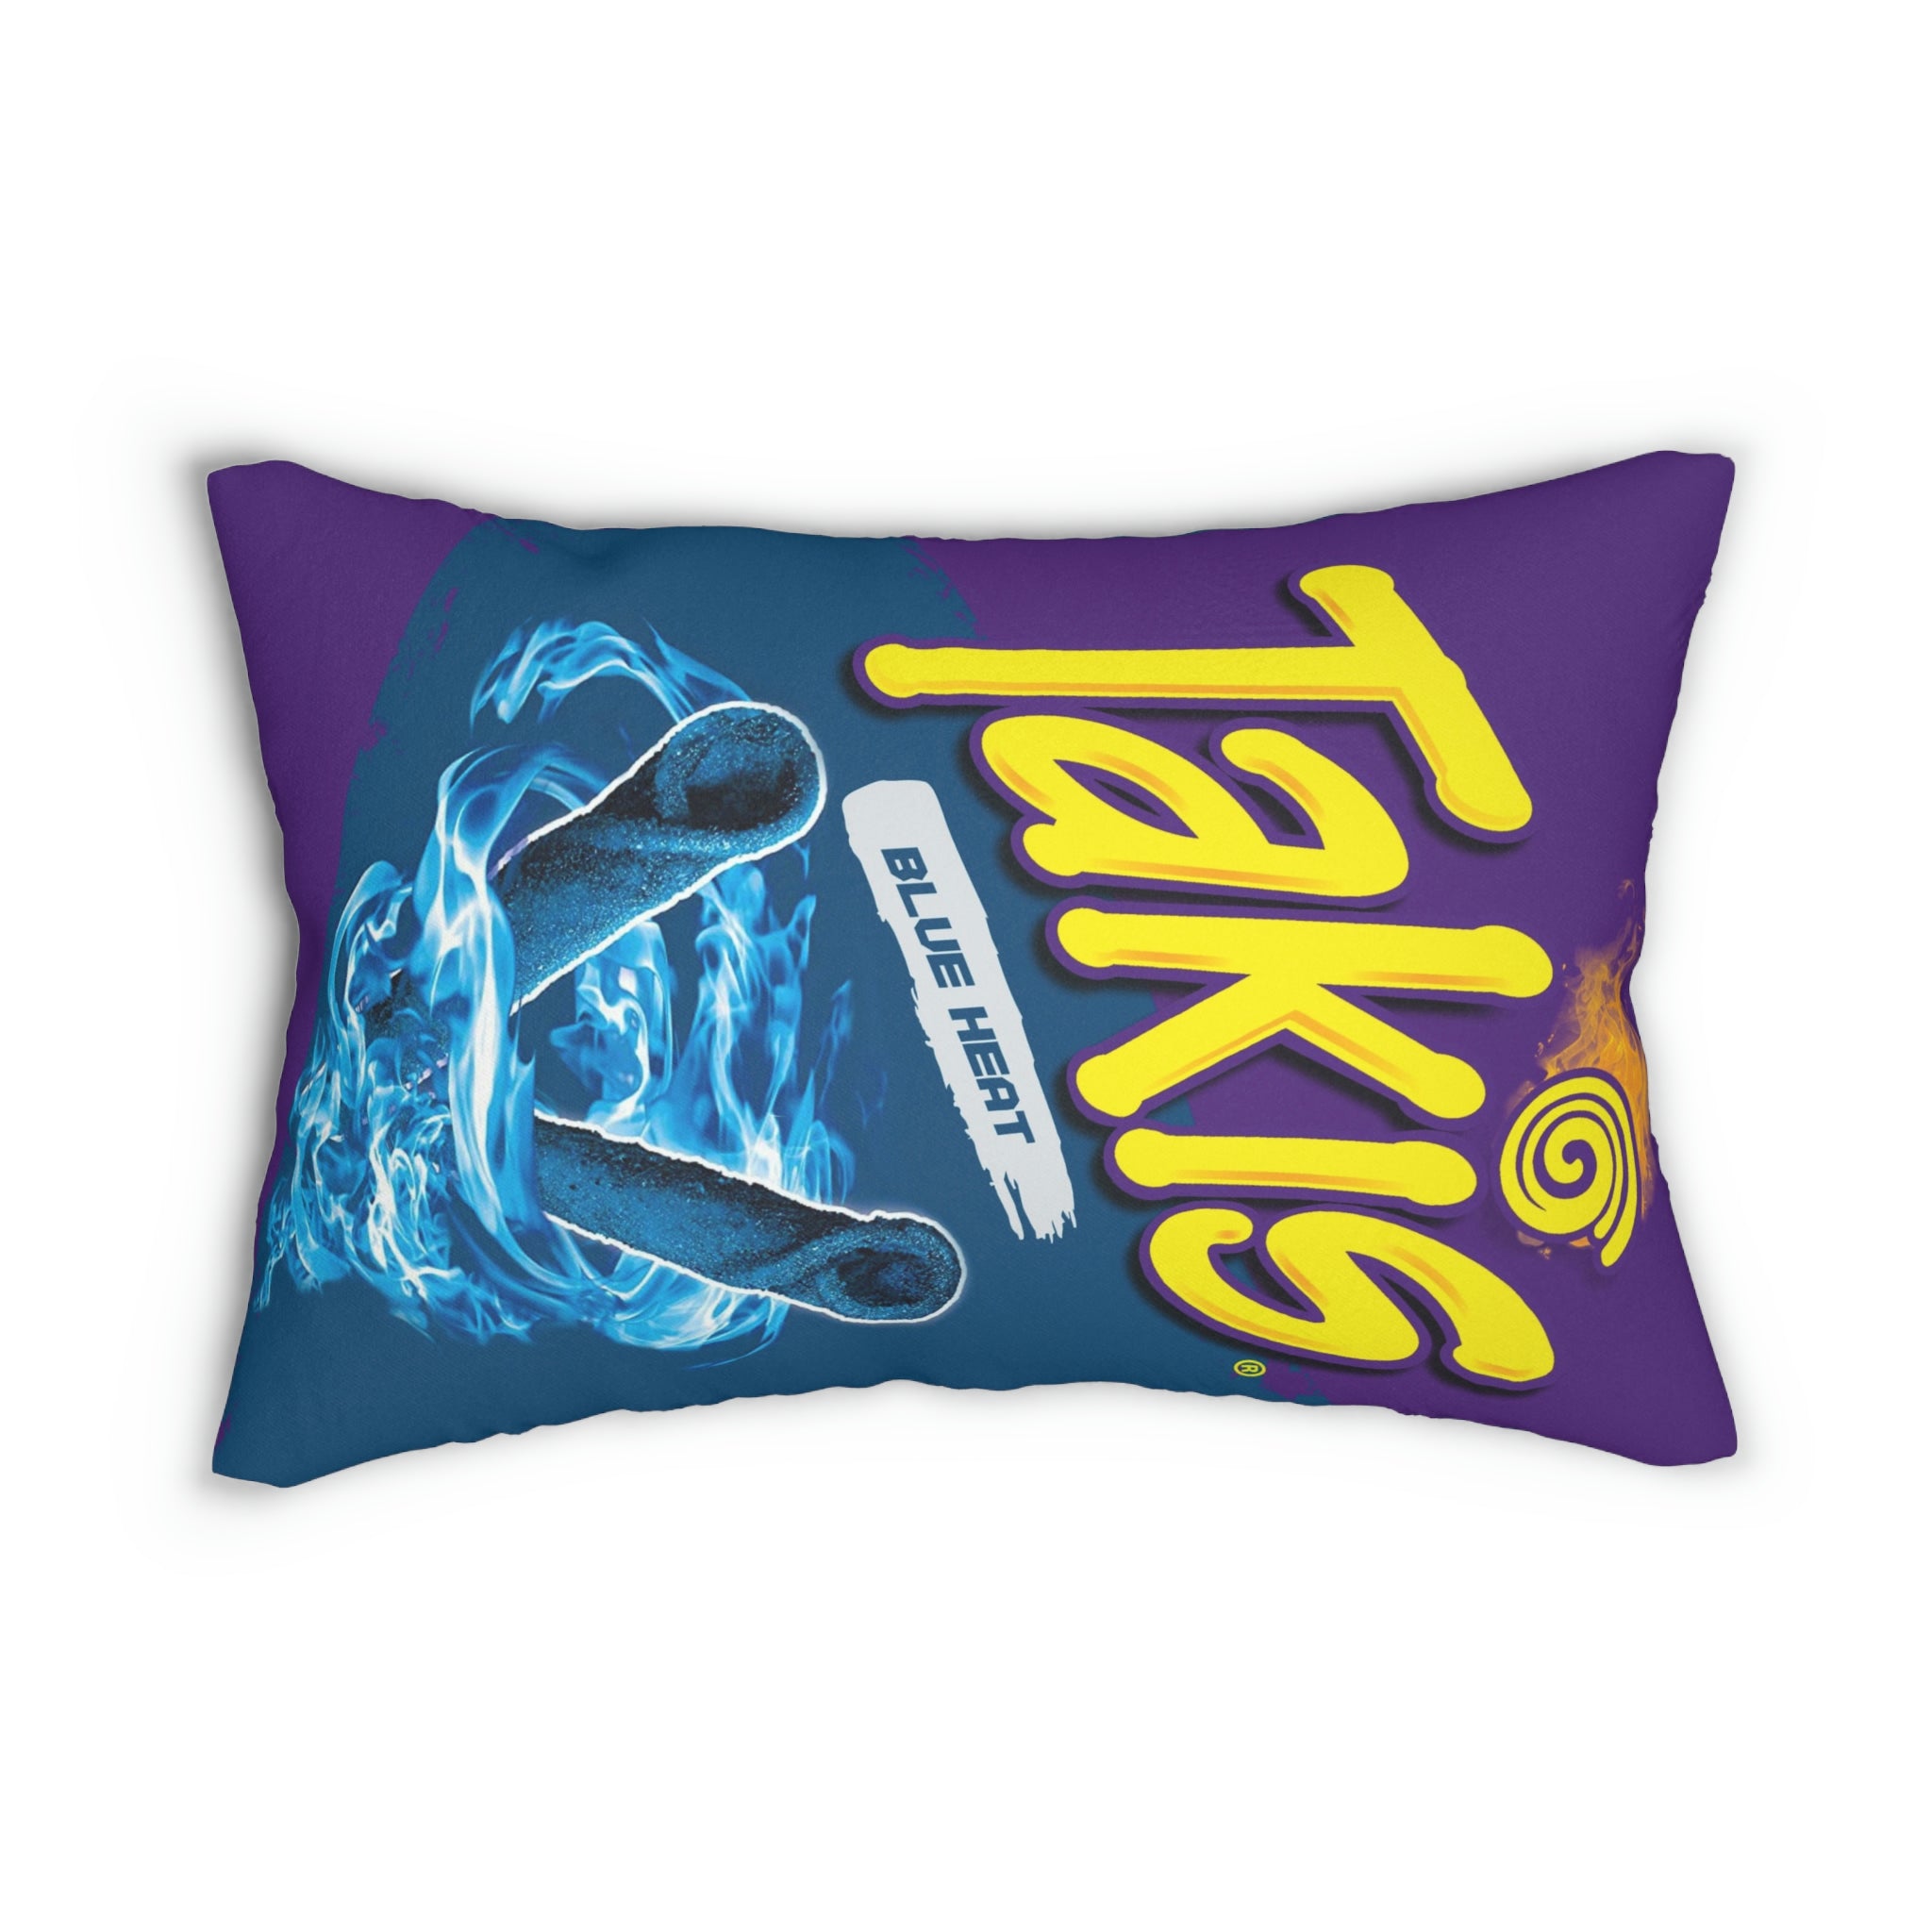 Cute Chips Blue Takis Themed Polyester Pillow